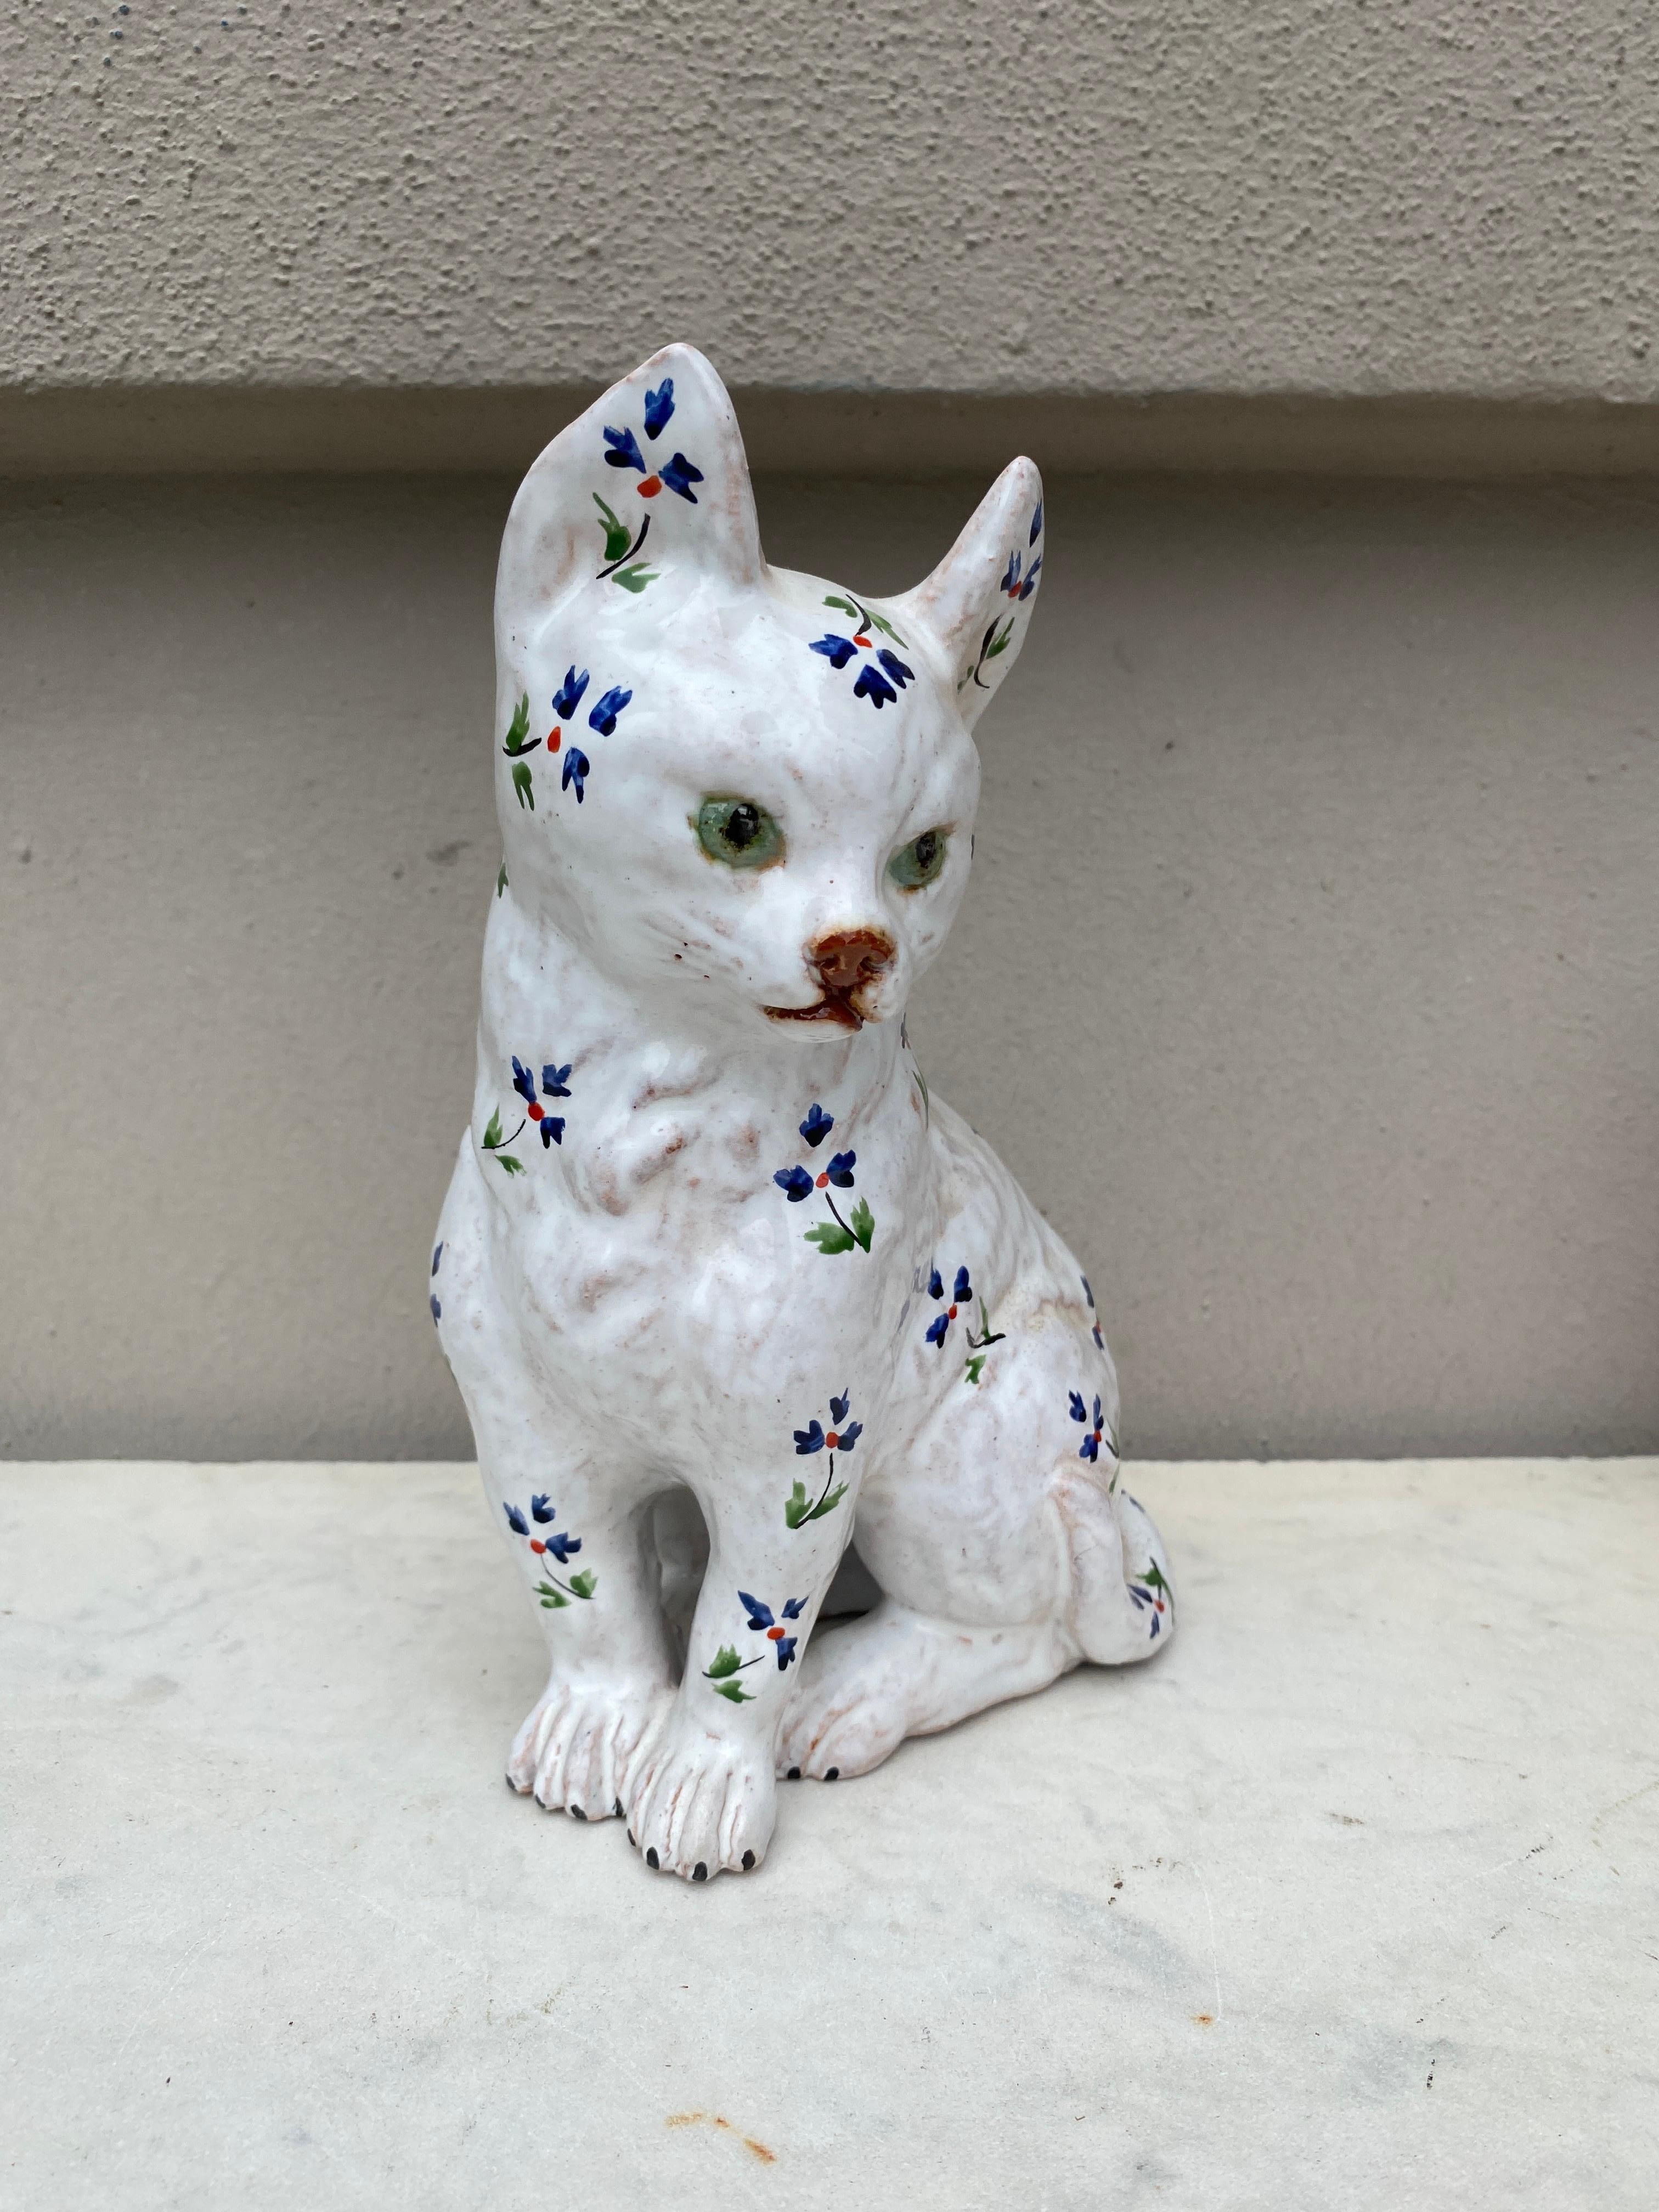 French Terracotta Majolica Cat Normandy Circa 1900.
decorated with Cornflowers called Barbeaux in France.
in the style and period of Emile Galle.